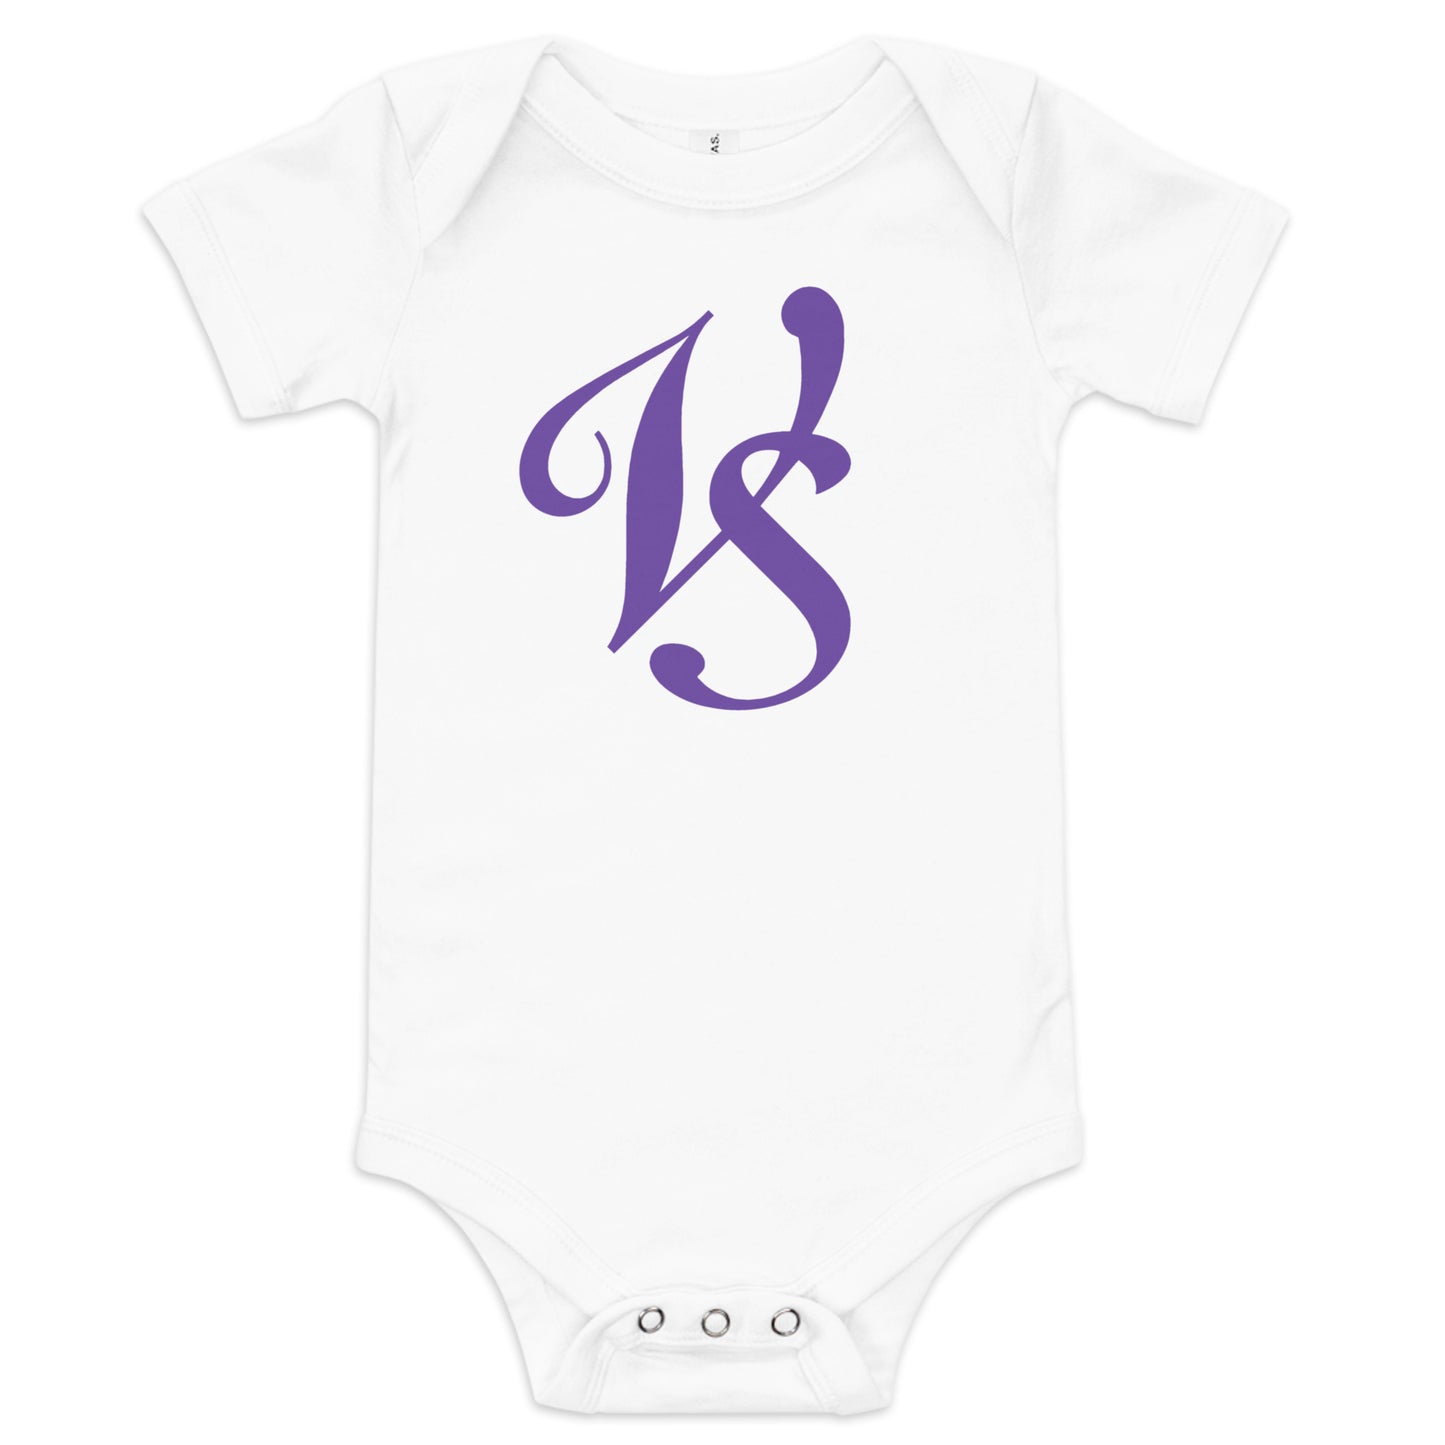 Vocal Standard - Printed Baby short sleeve one piece